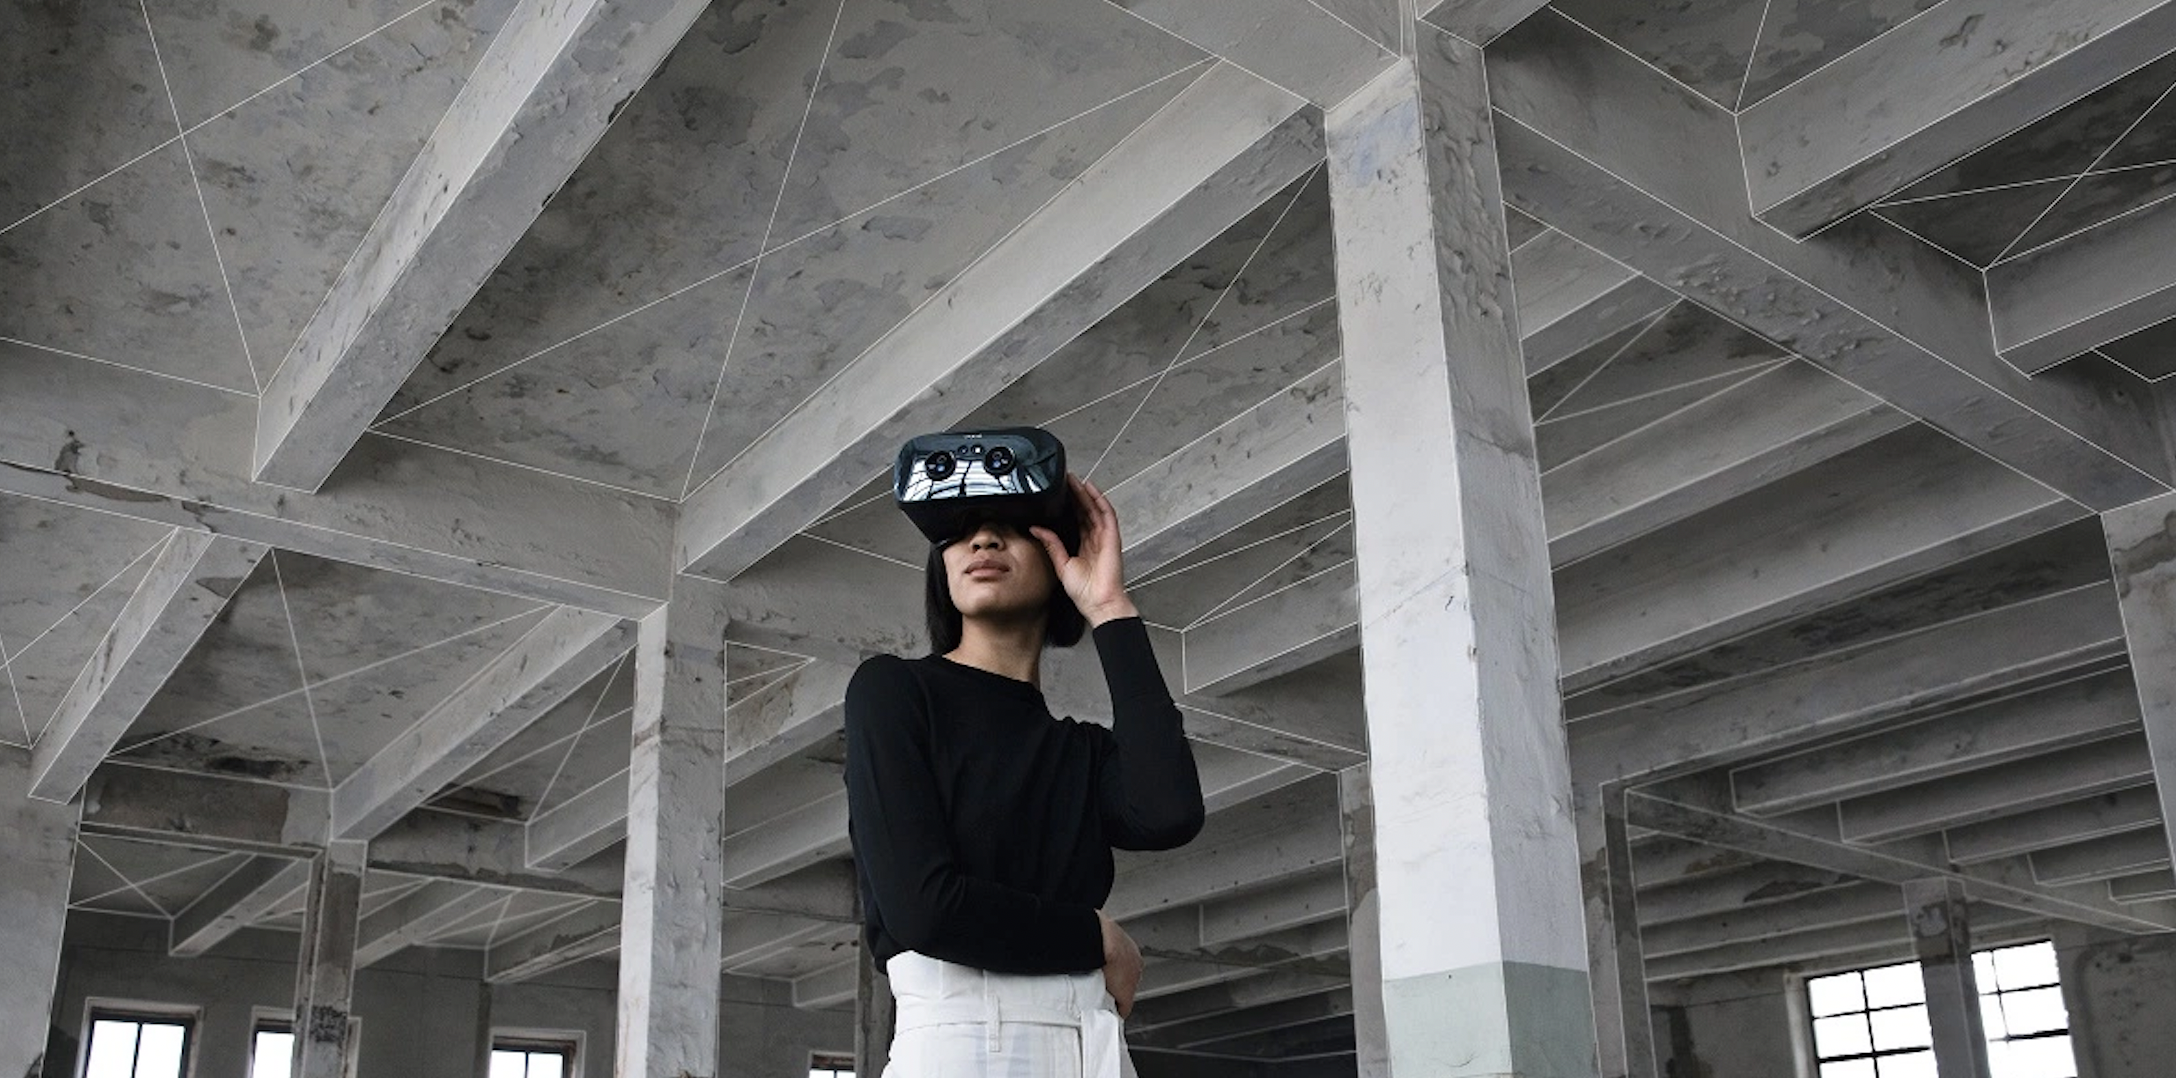 Varjo Launches Metaverse Teleportation - In Reality